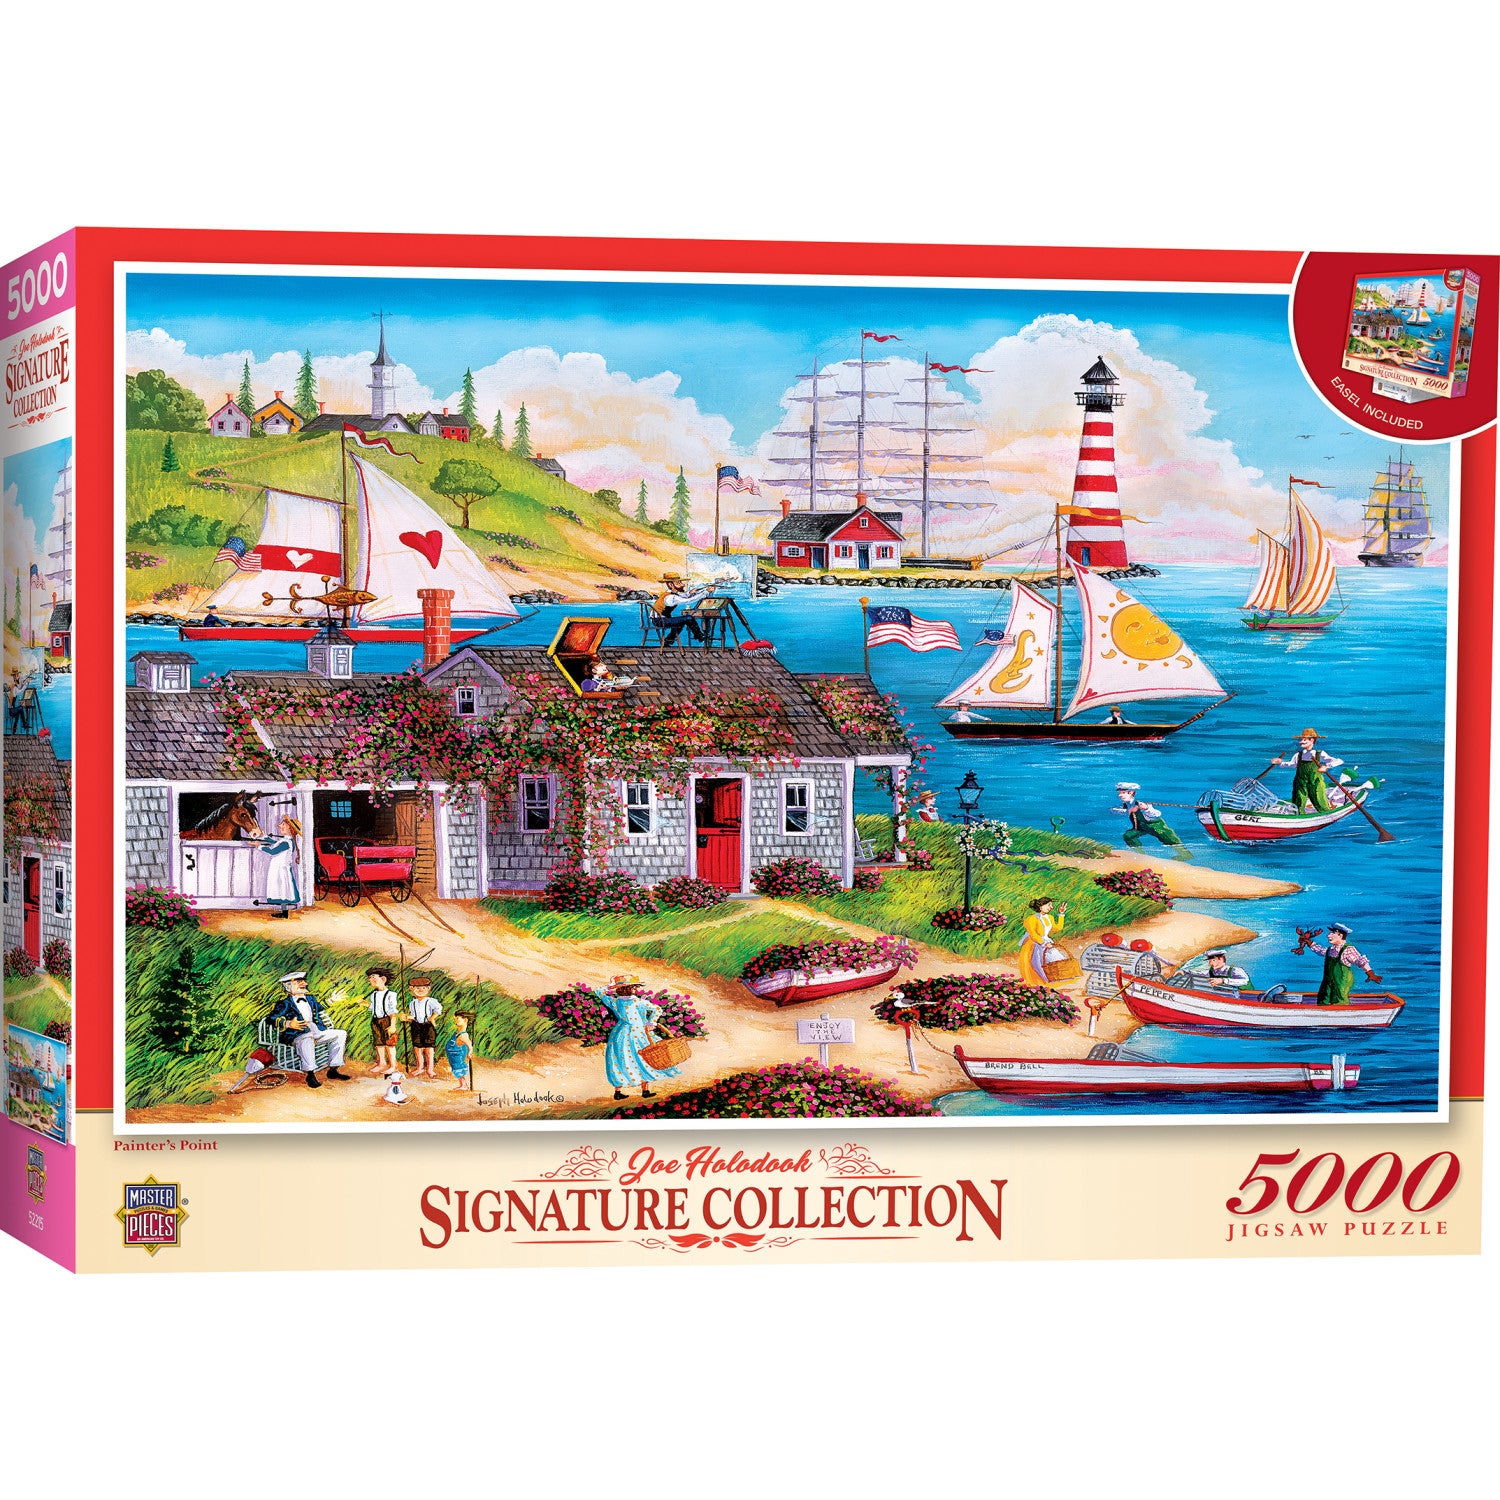 Signature Collection - Painter's Point 5000 Piece Jigsaw Puzzle